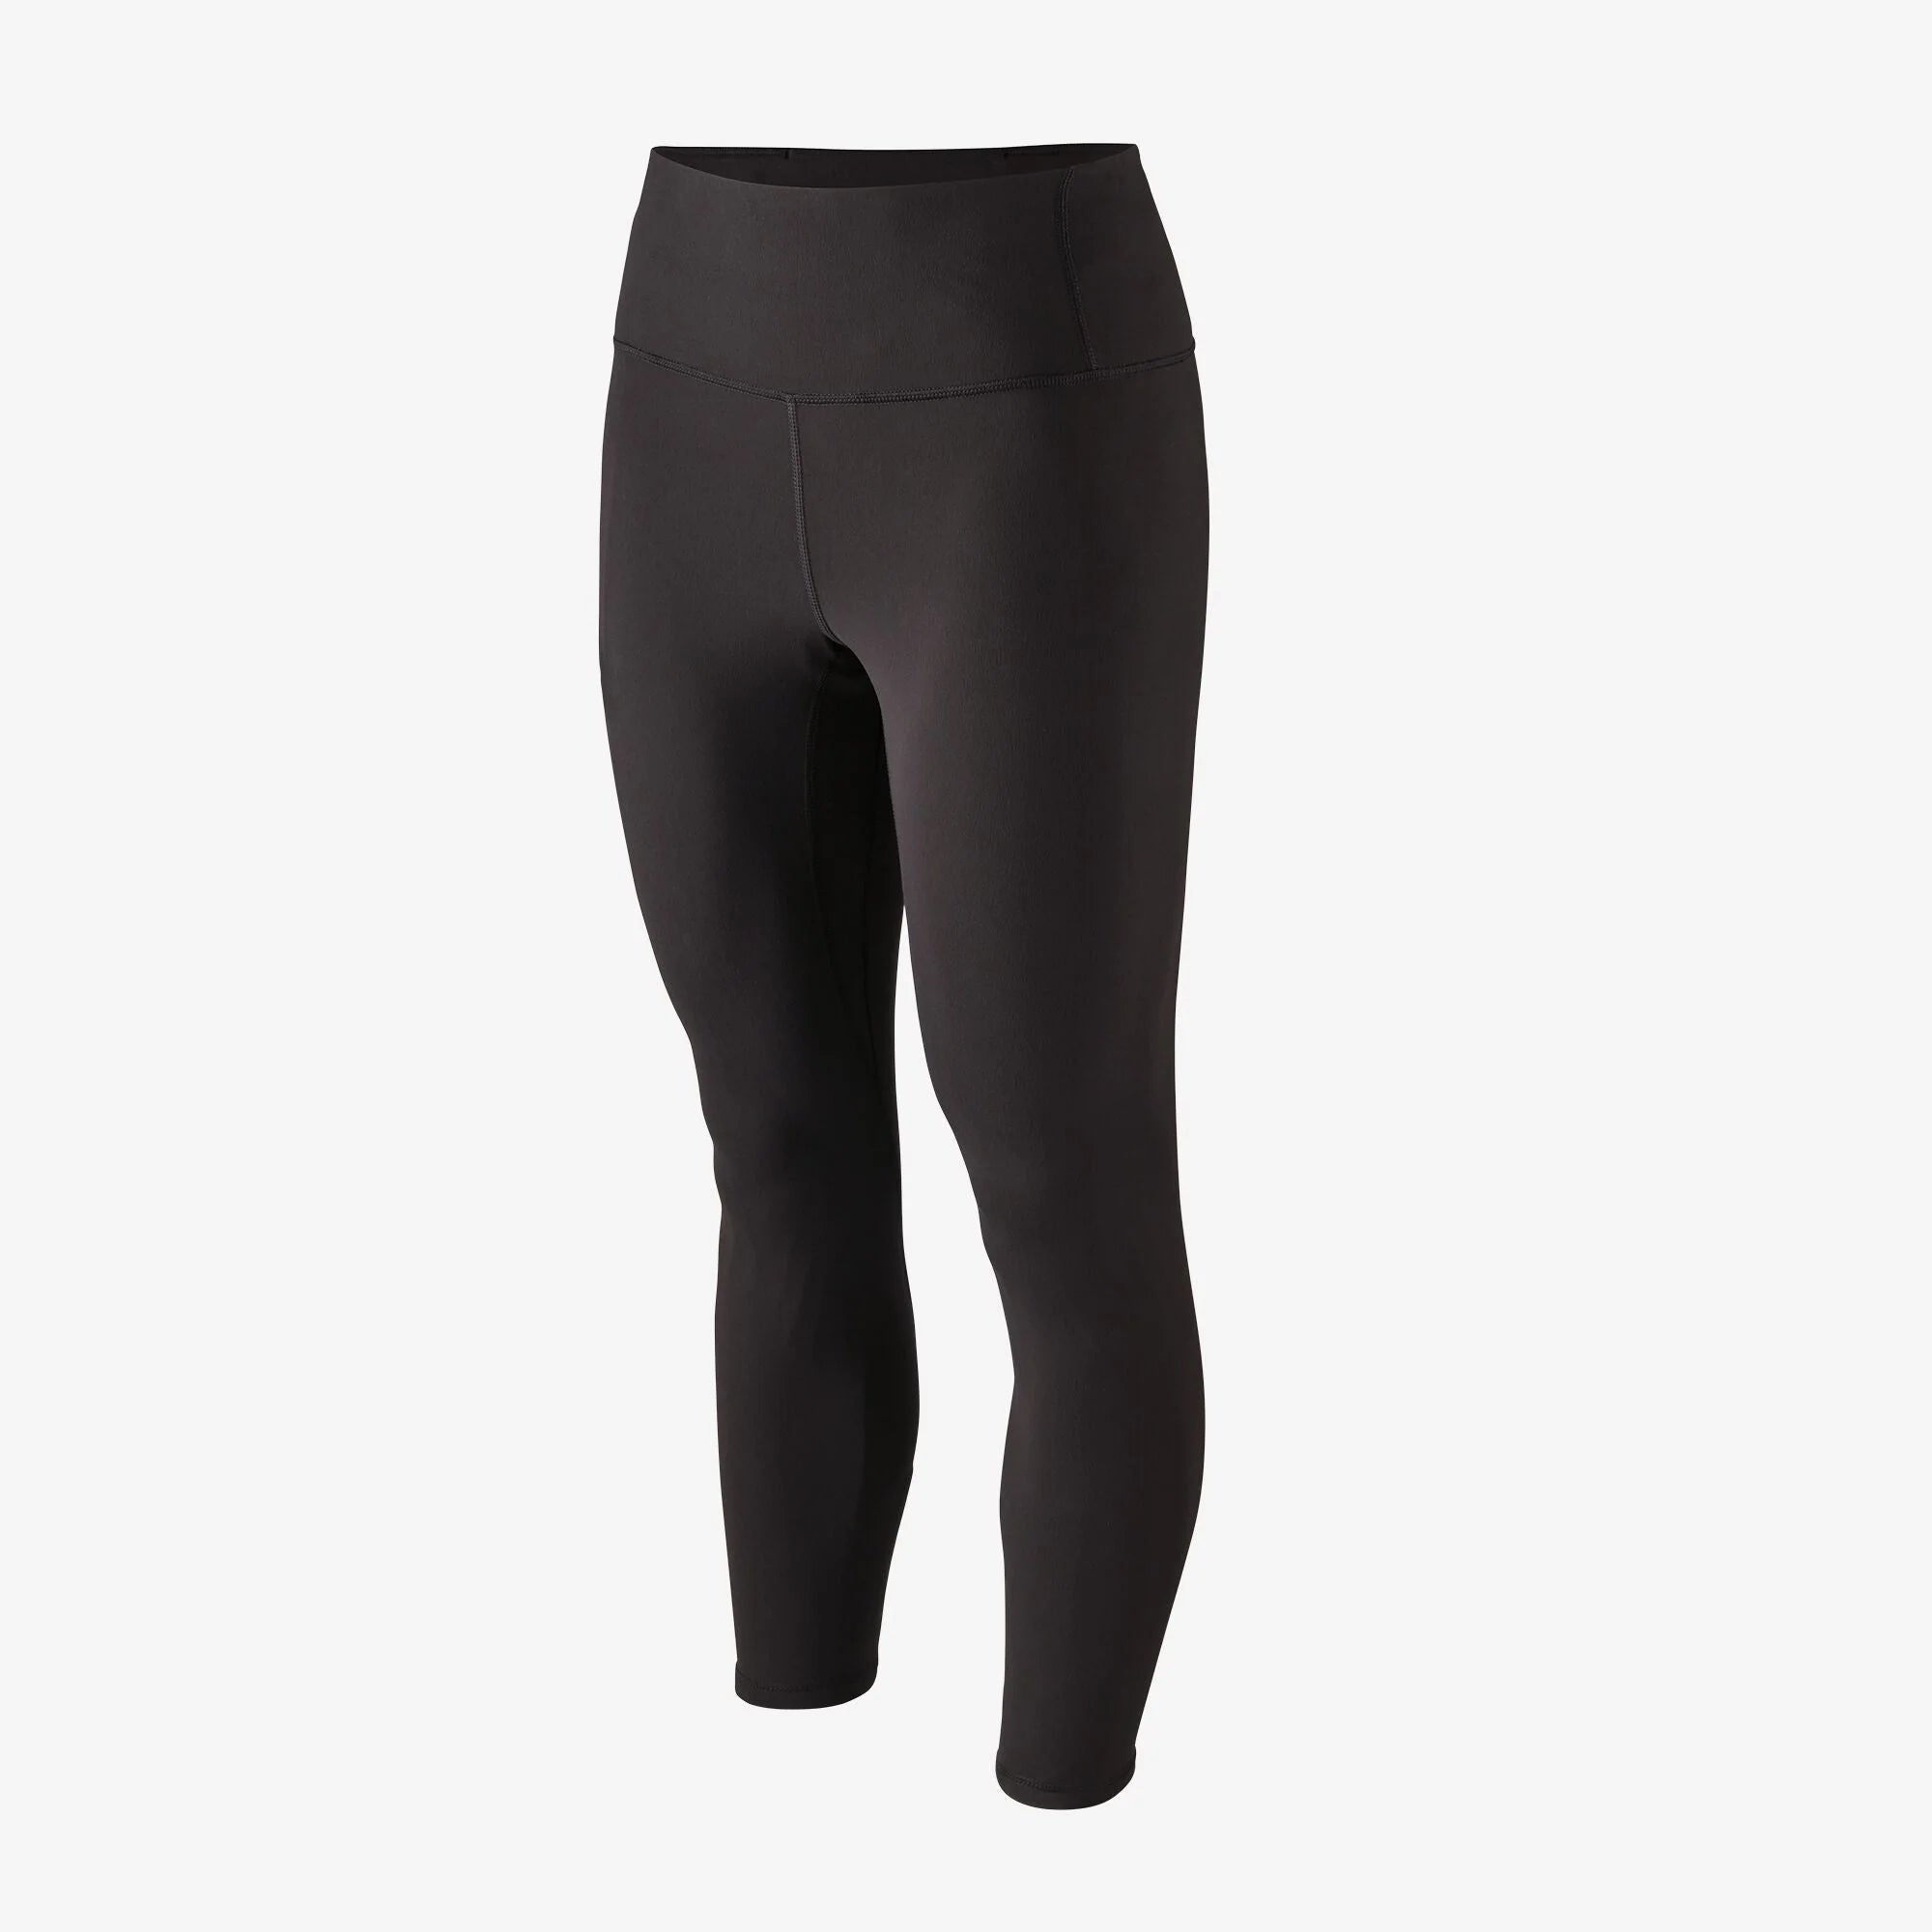 Patagonia Maipo 7/8 Tights (Women's) - Find Your Feet Australia